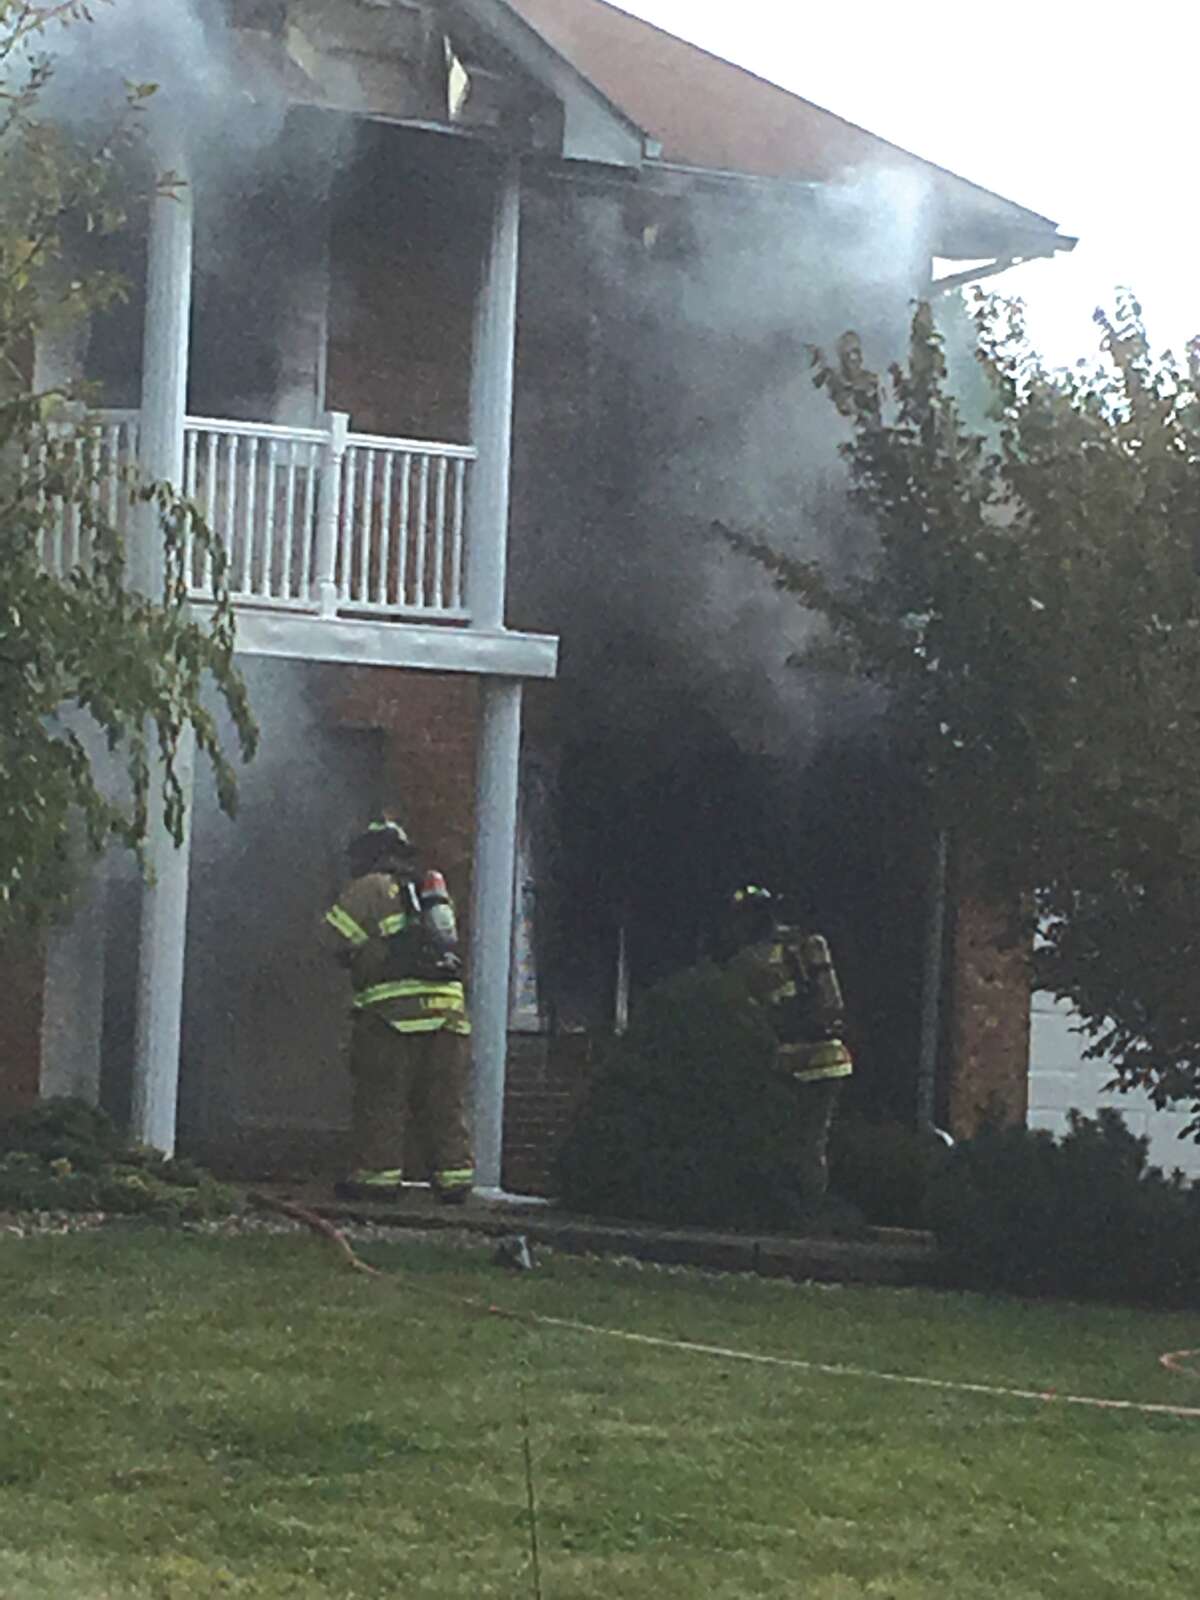 Pictured is a scene from the house fire on Timber Meadows Place.